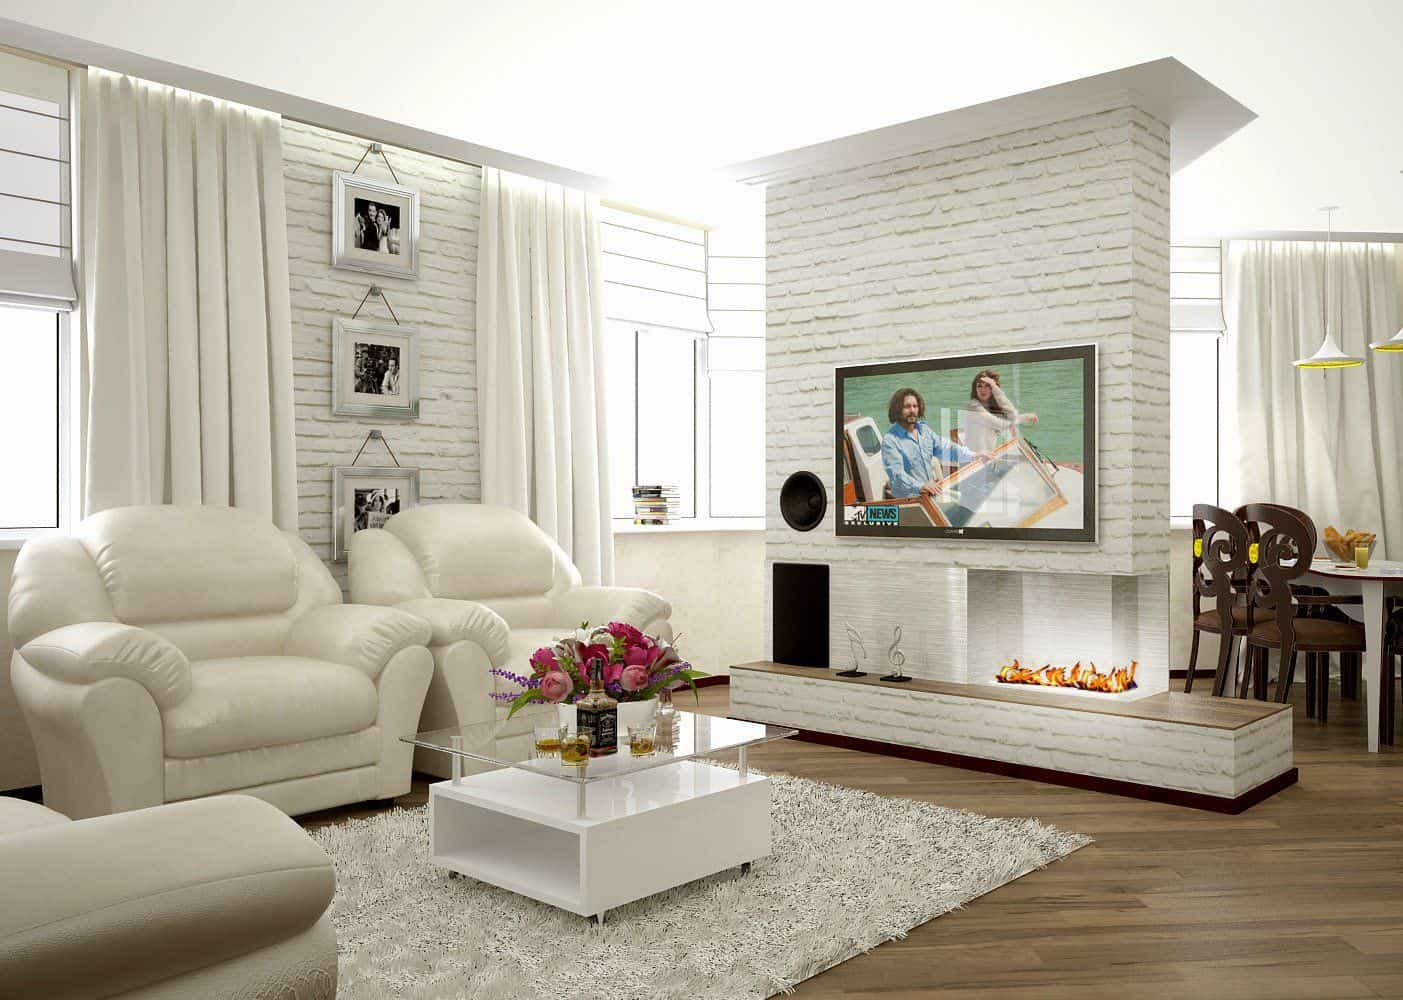 Brick Wall in the Living Room Stylish Interior. Totally white pastel room with low coffee table and chic leather furniture set